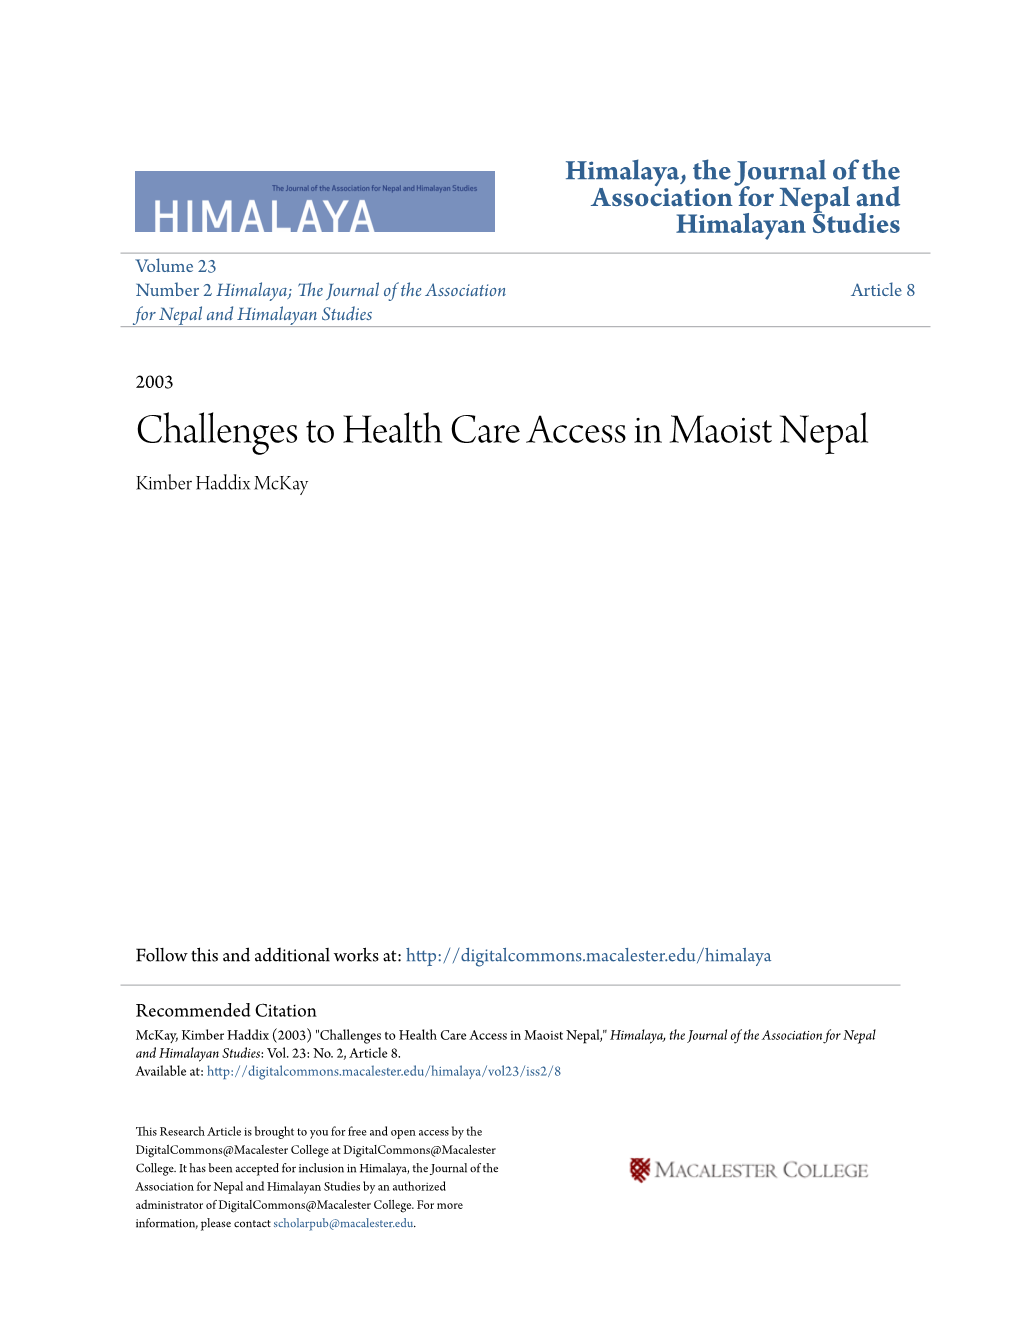 Challenges to Health Care Access in Maoist Nepal Kimber Haddix Mckay